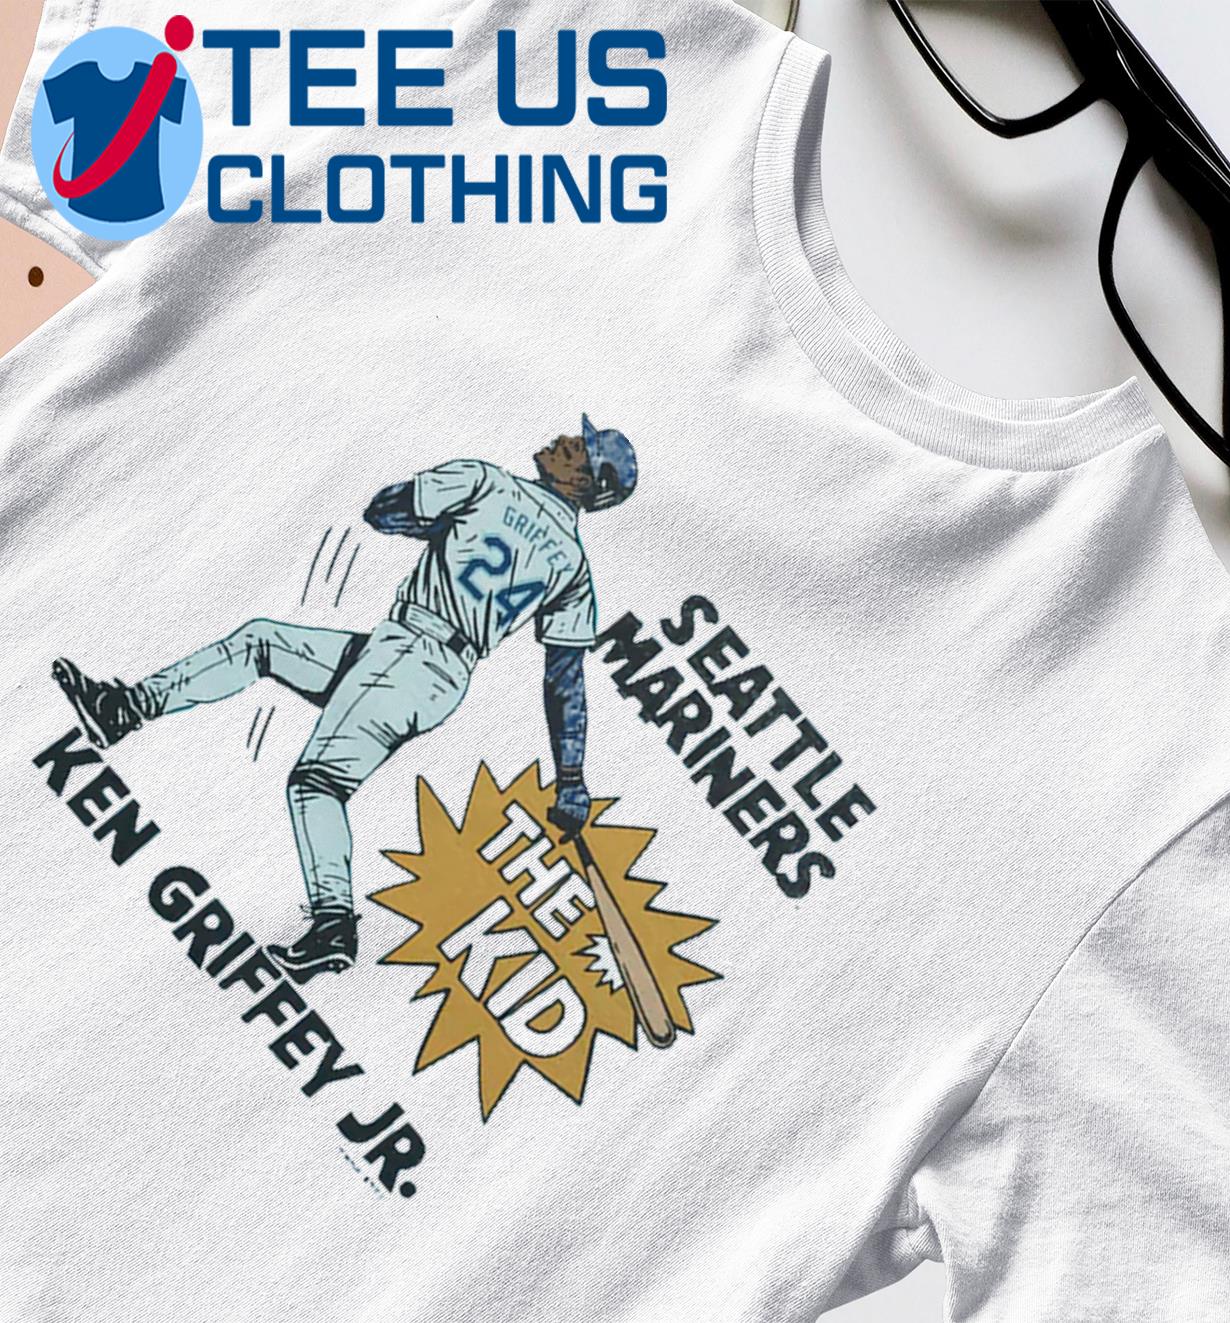 Ken Griffey Jr Mariners Home Run T-Shirt from Homage. | Teal | Vintage Apparel from Homage.